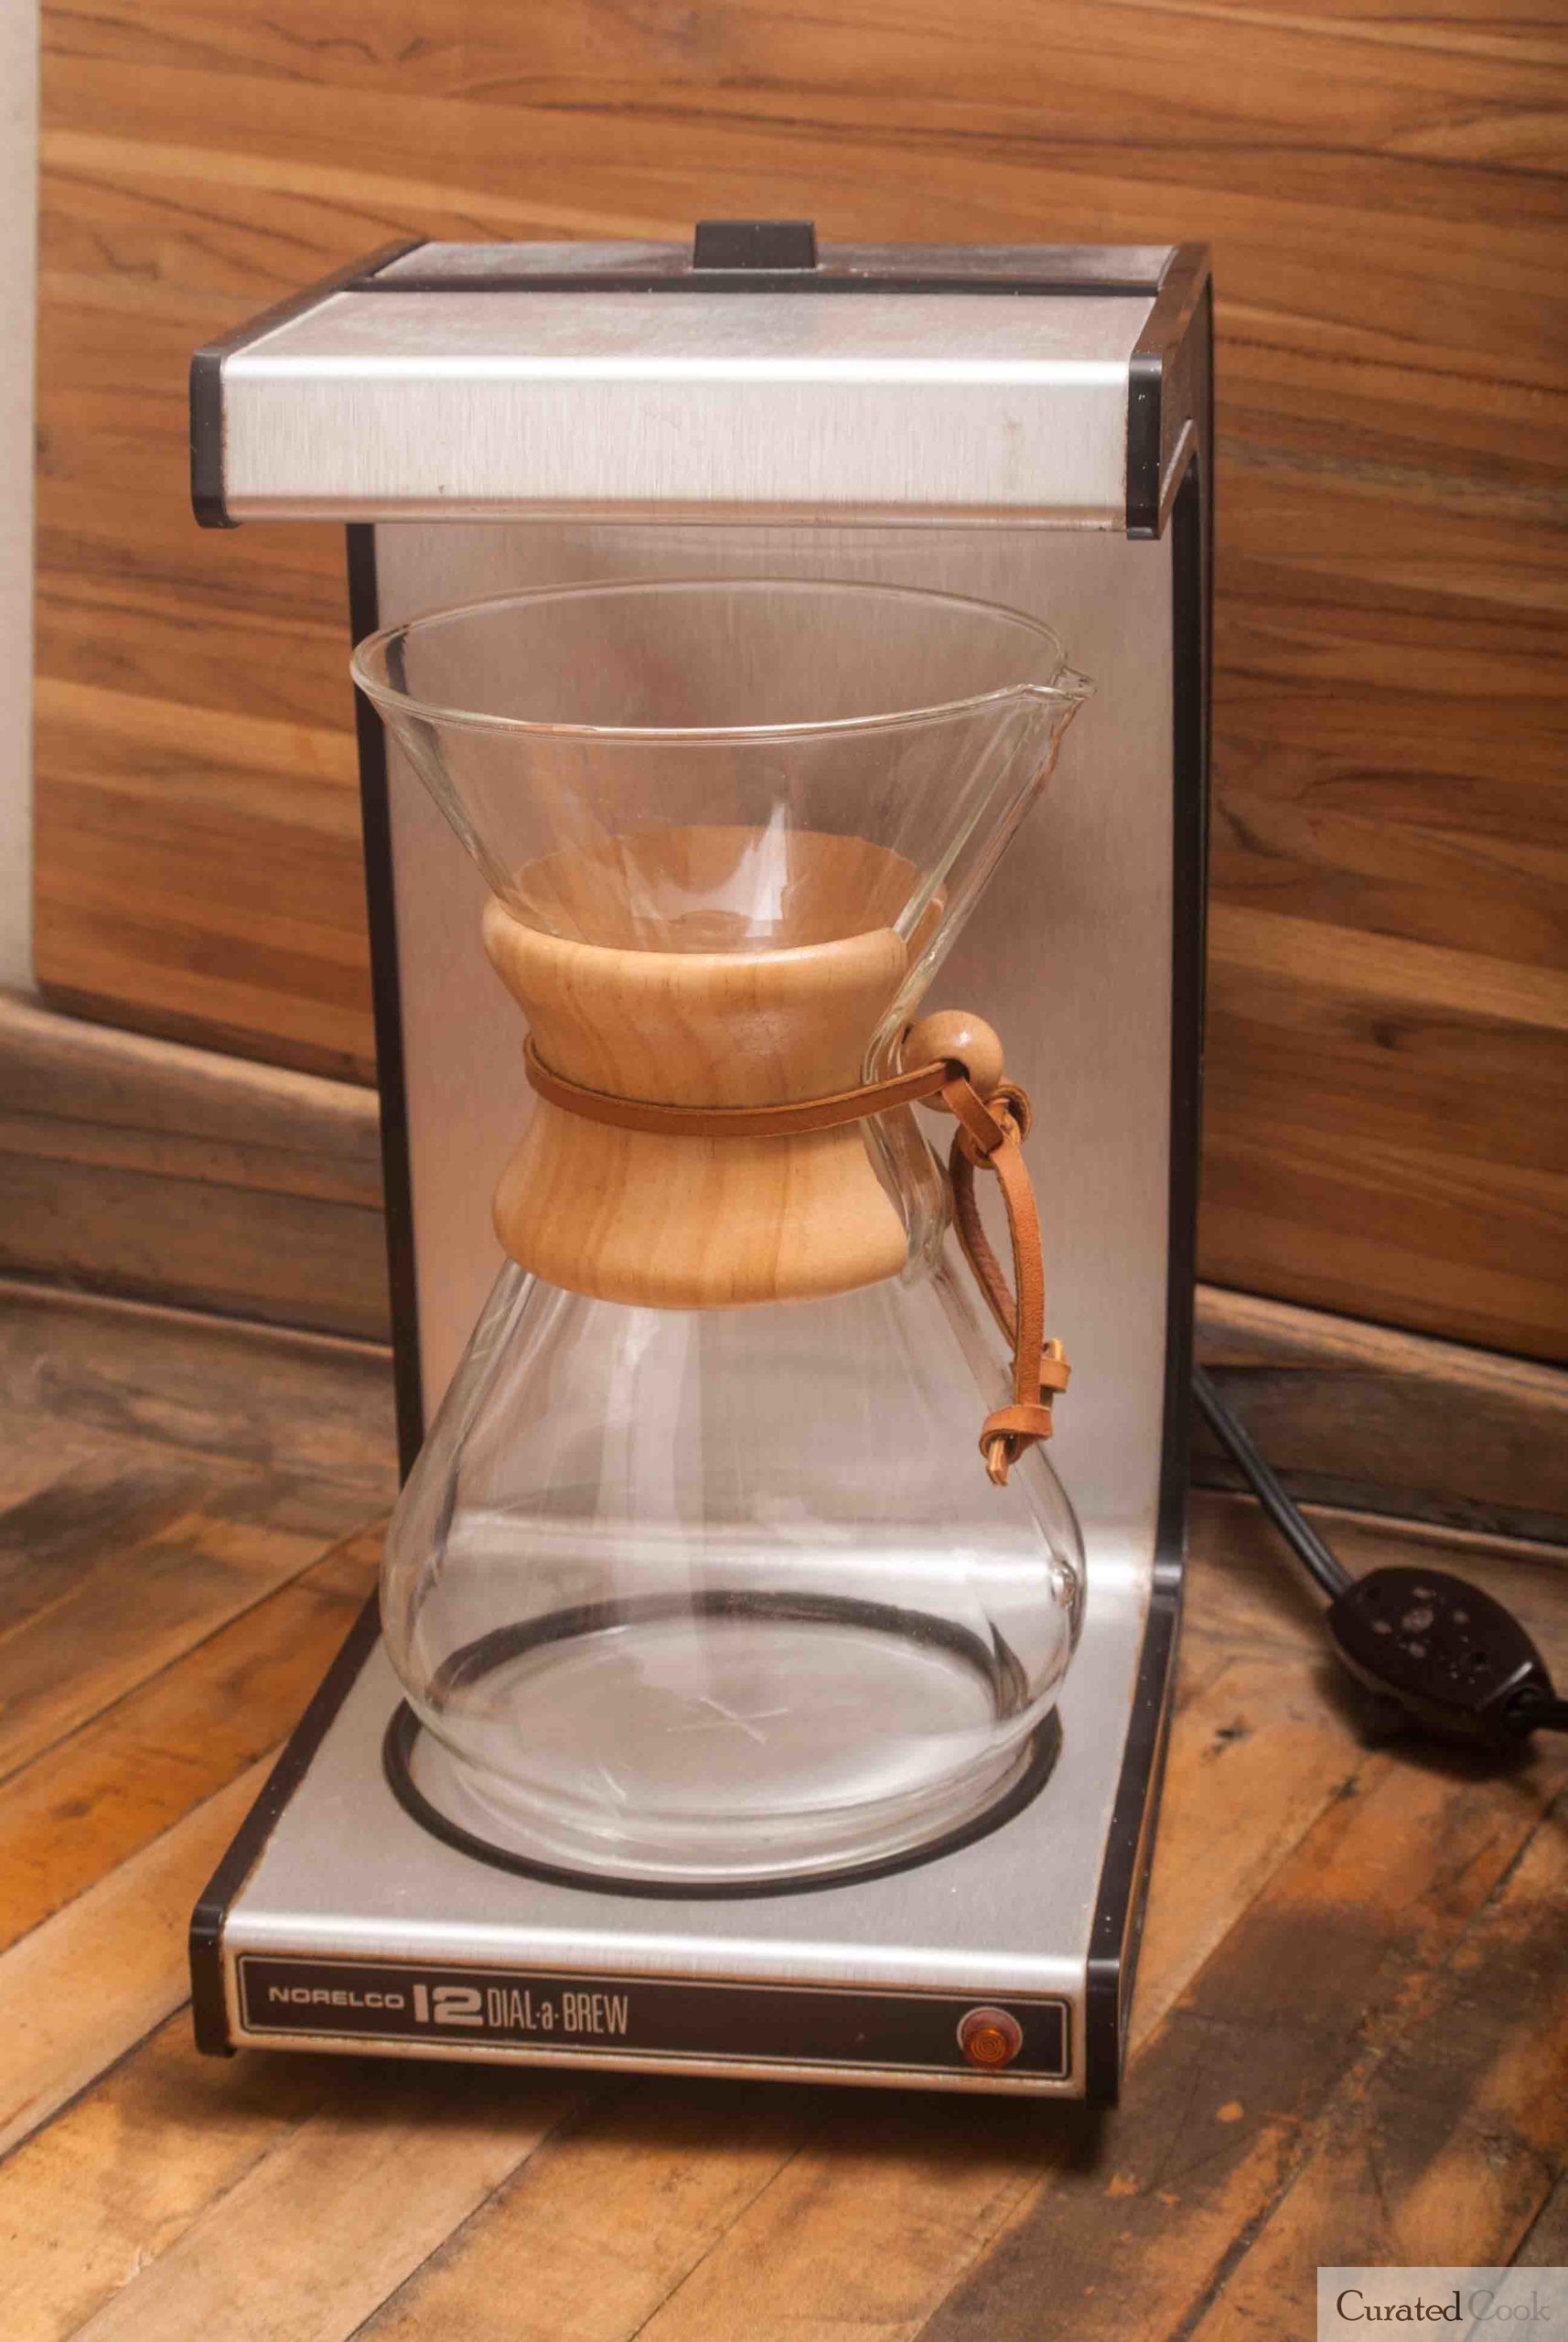 Norelco Dial A brew with Chemex